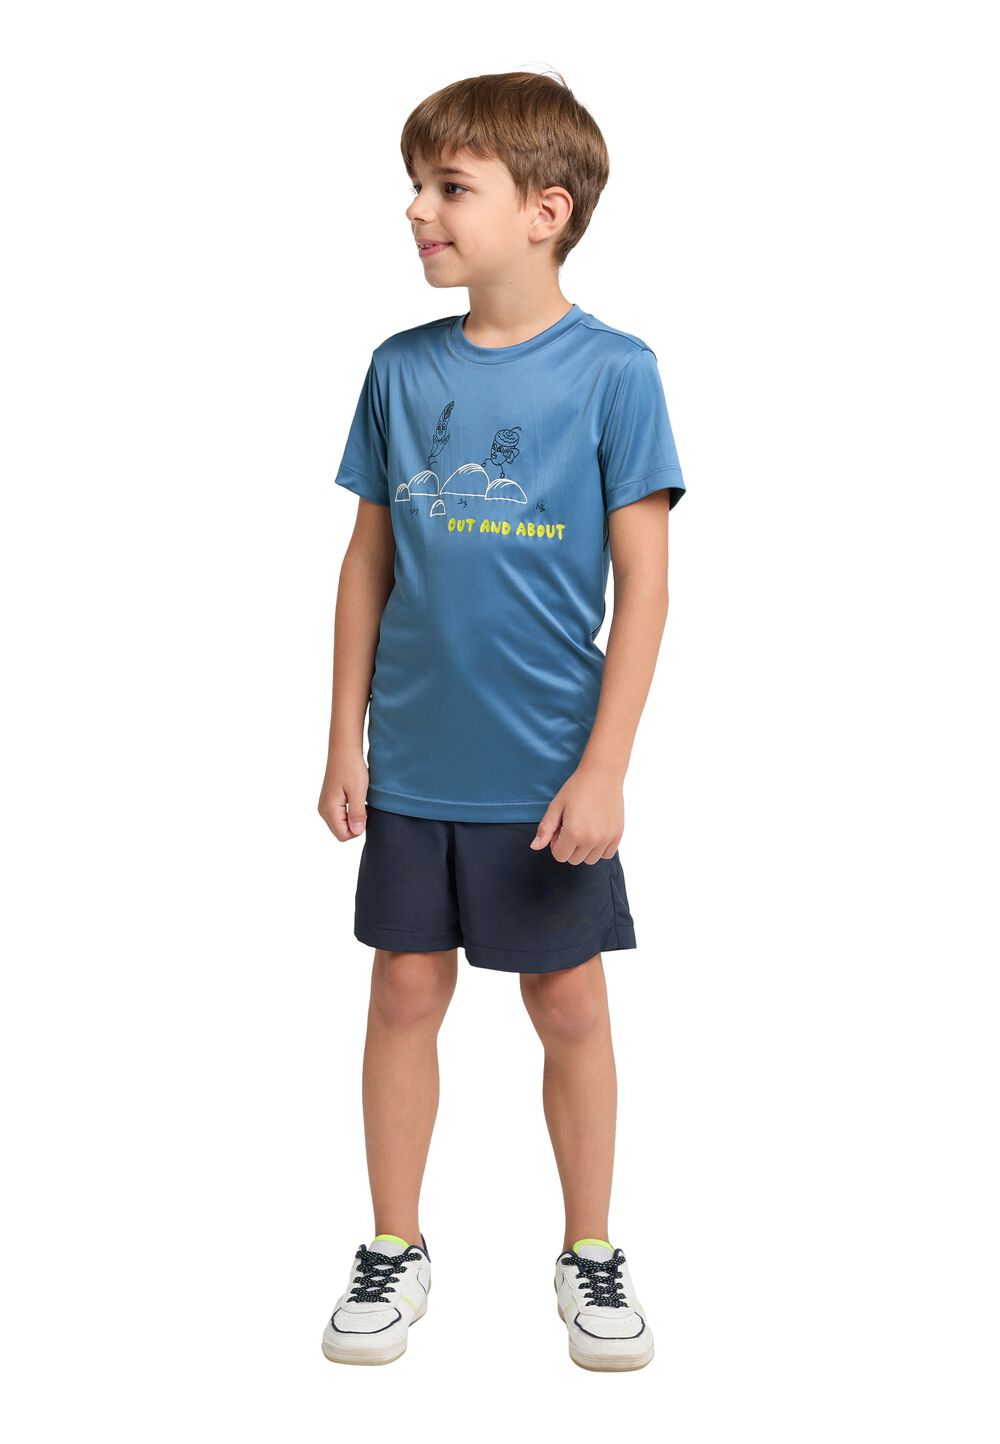 Jack Wolfskin OUT AND About T-Shirt Kids Functioneel shirt Kinderen 116 ele tal blue ele tal blue